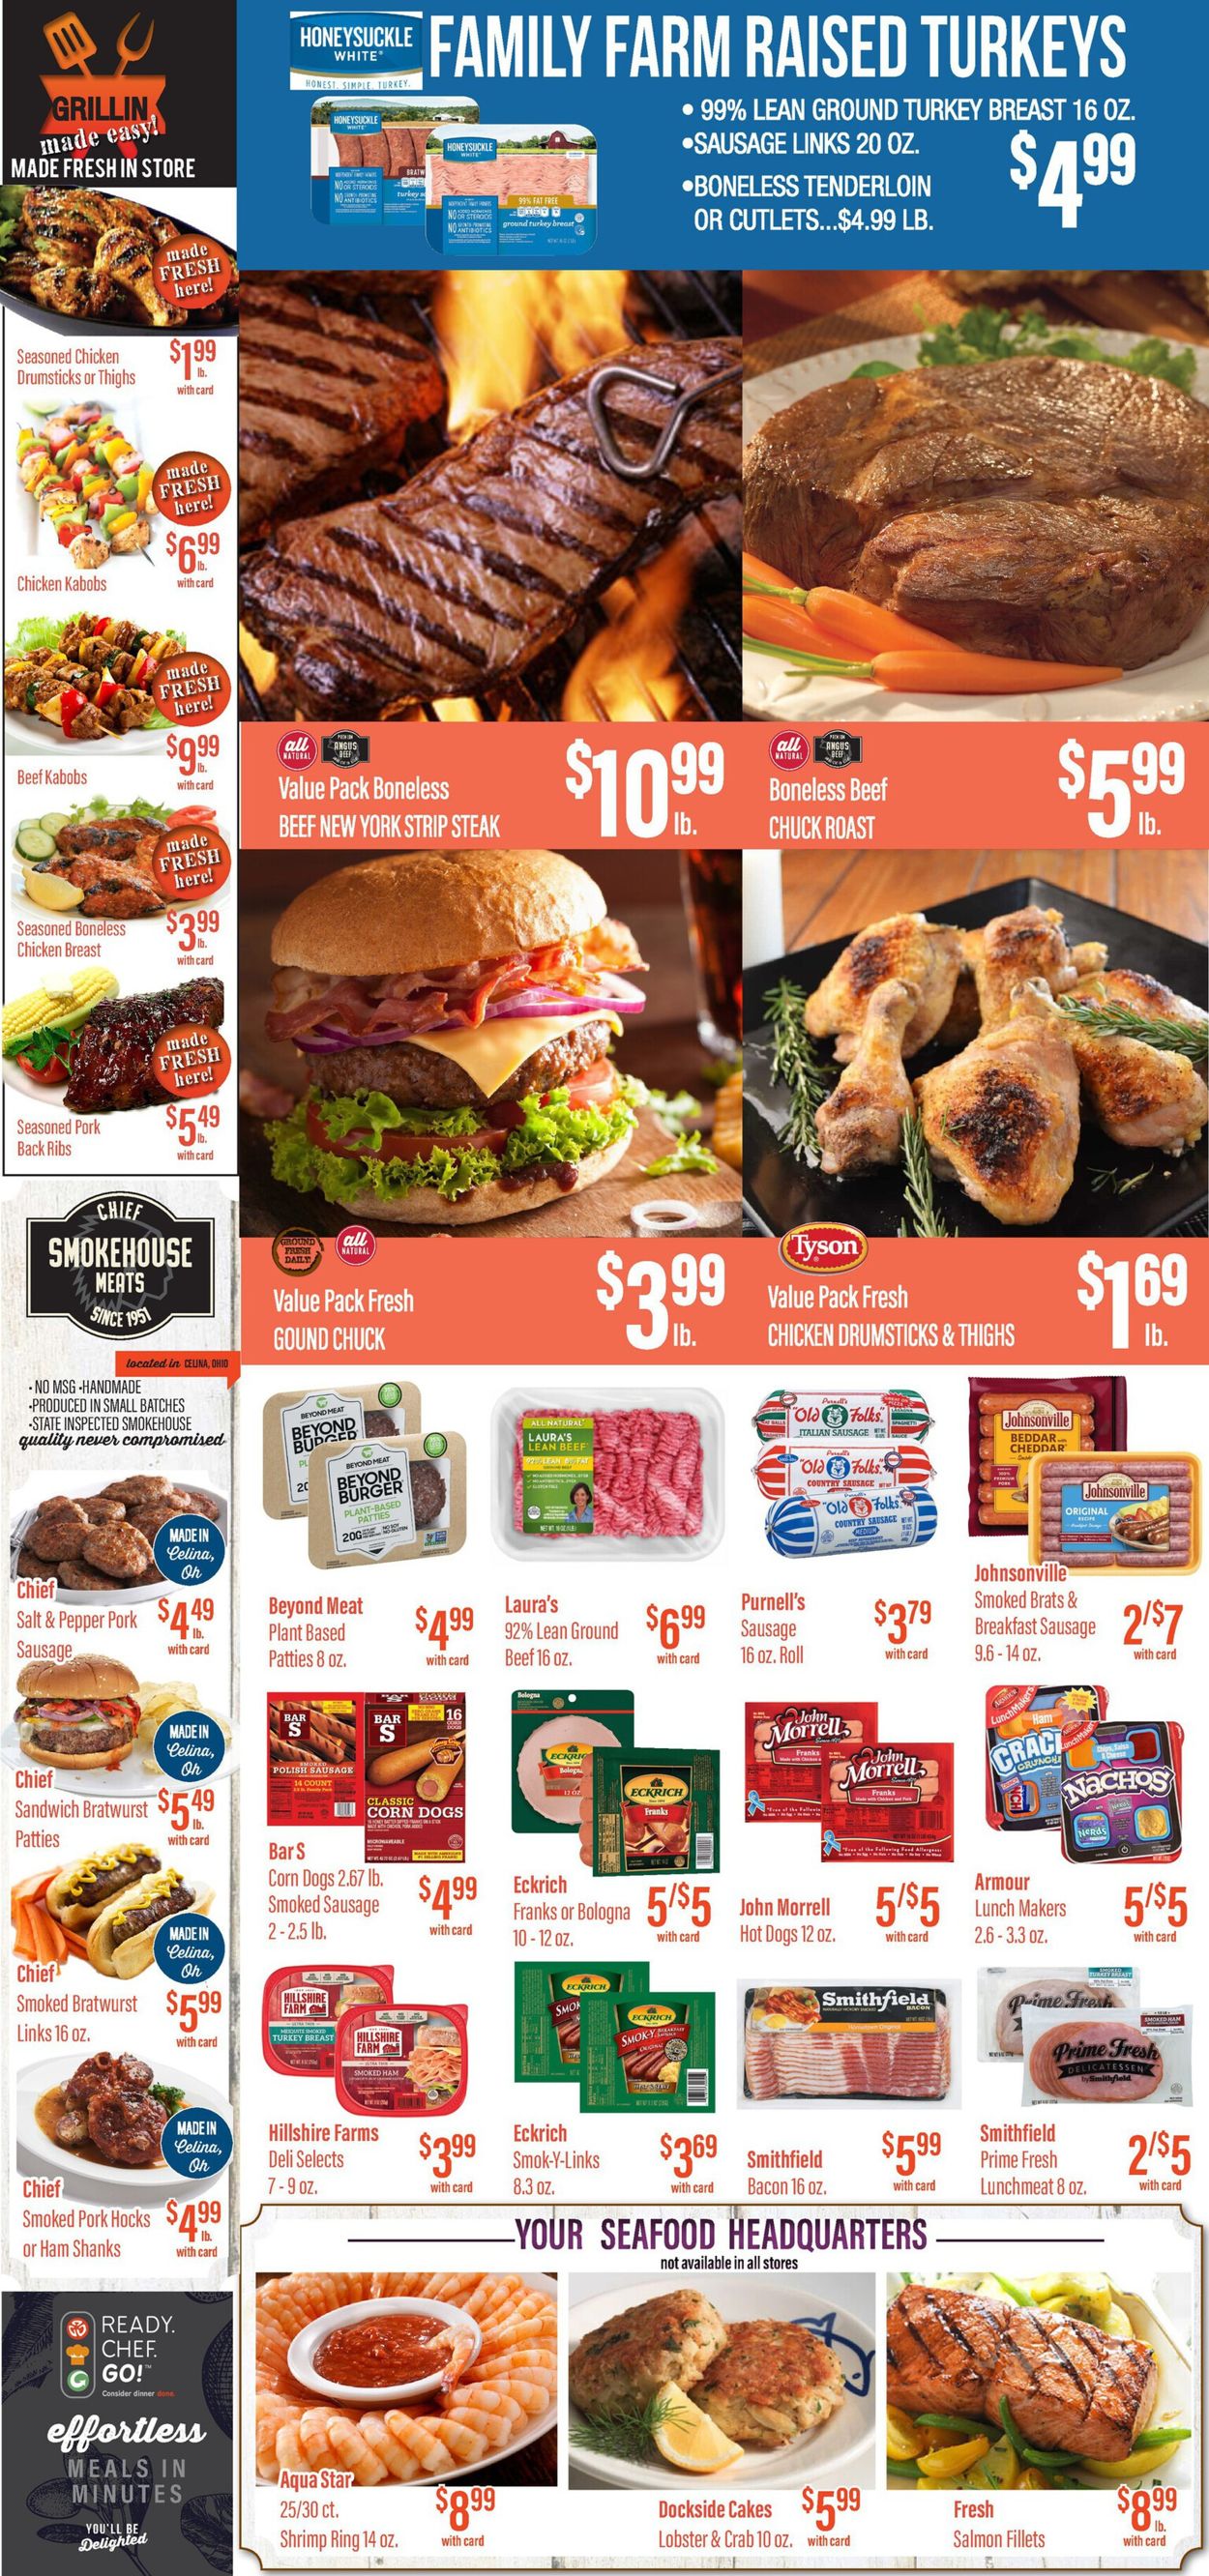 Remke Markets Ad from 07/29/2021